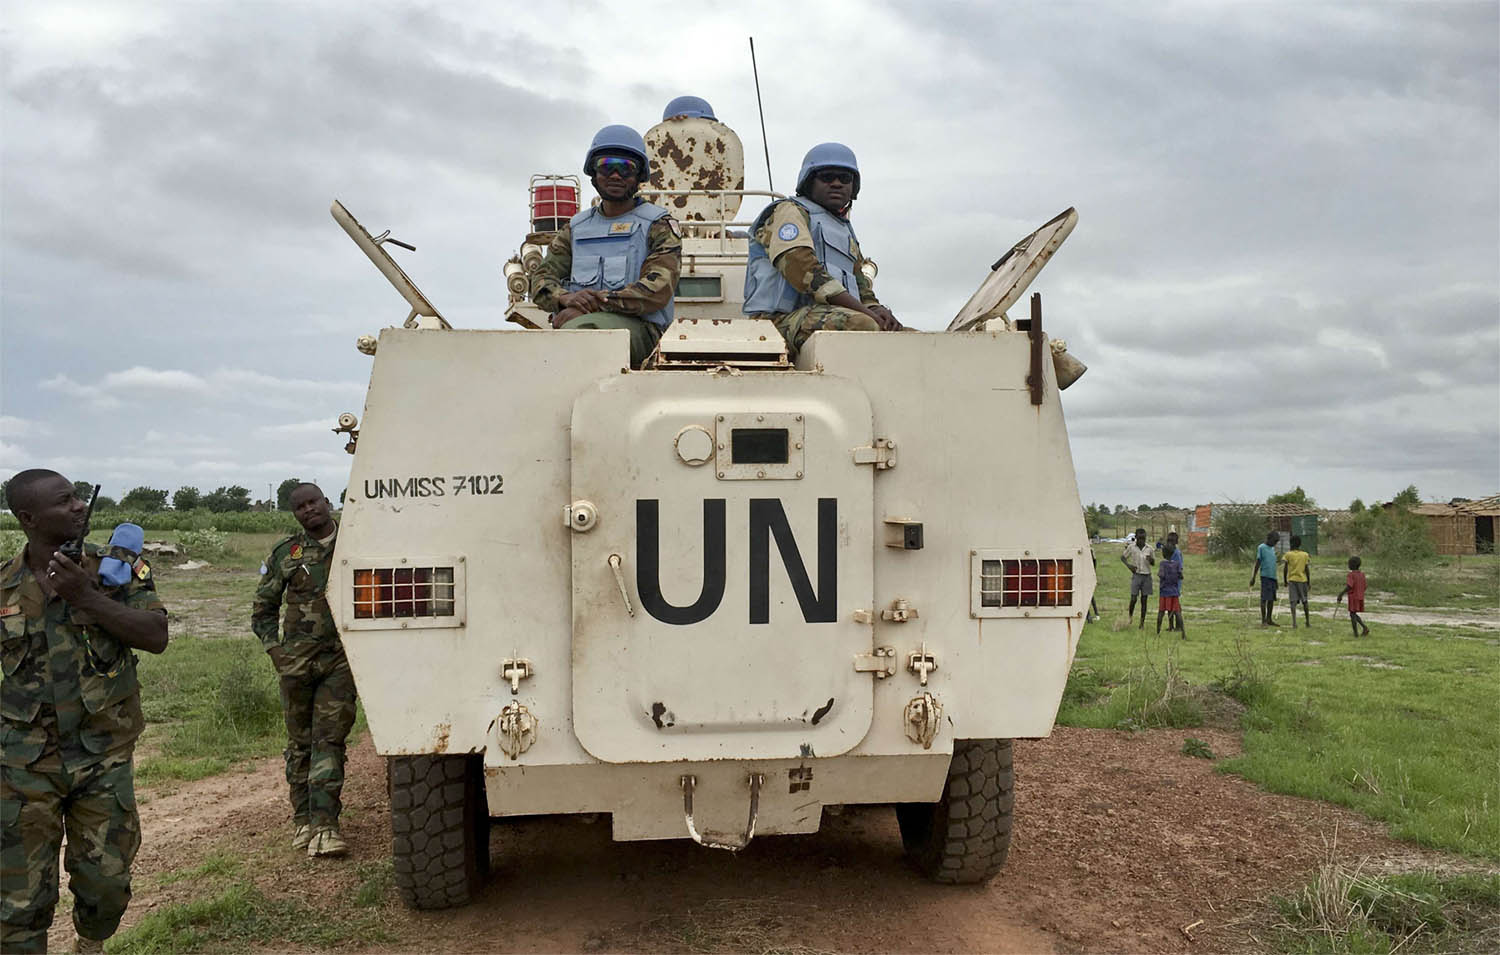 Peacekeepers from the United Nations Mission in South Sudan